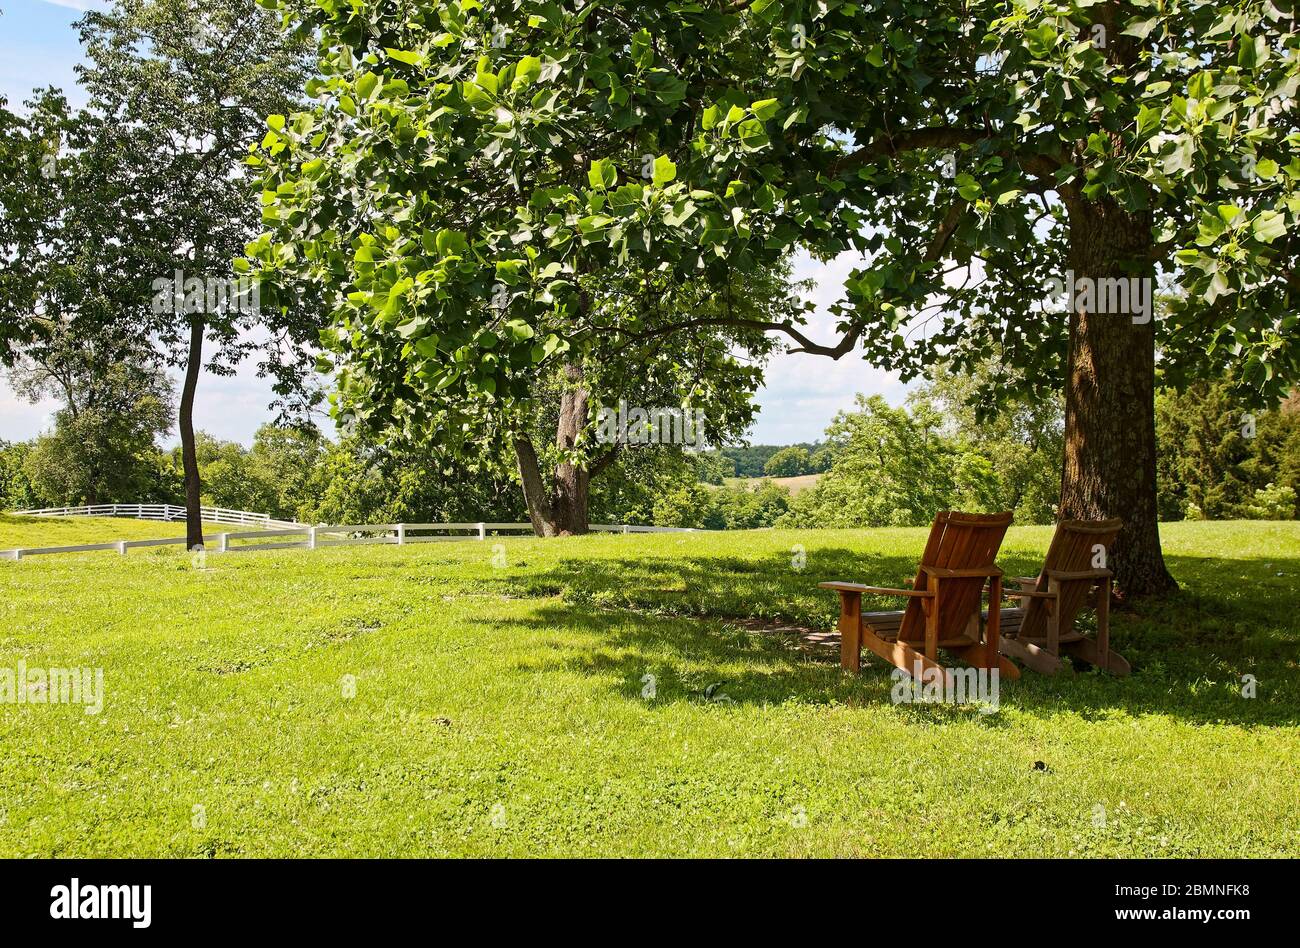 peaceful scene, green grass, trees, white fences, two Adirondack chairs, shade of tree, Kentucky; spring Stock Photo